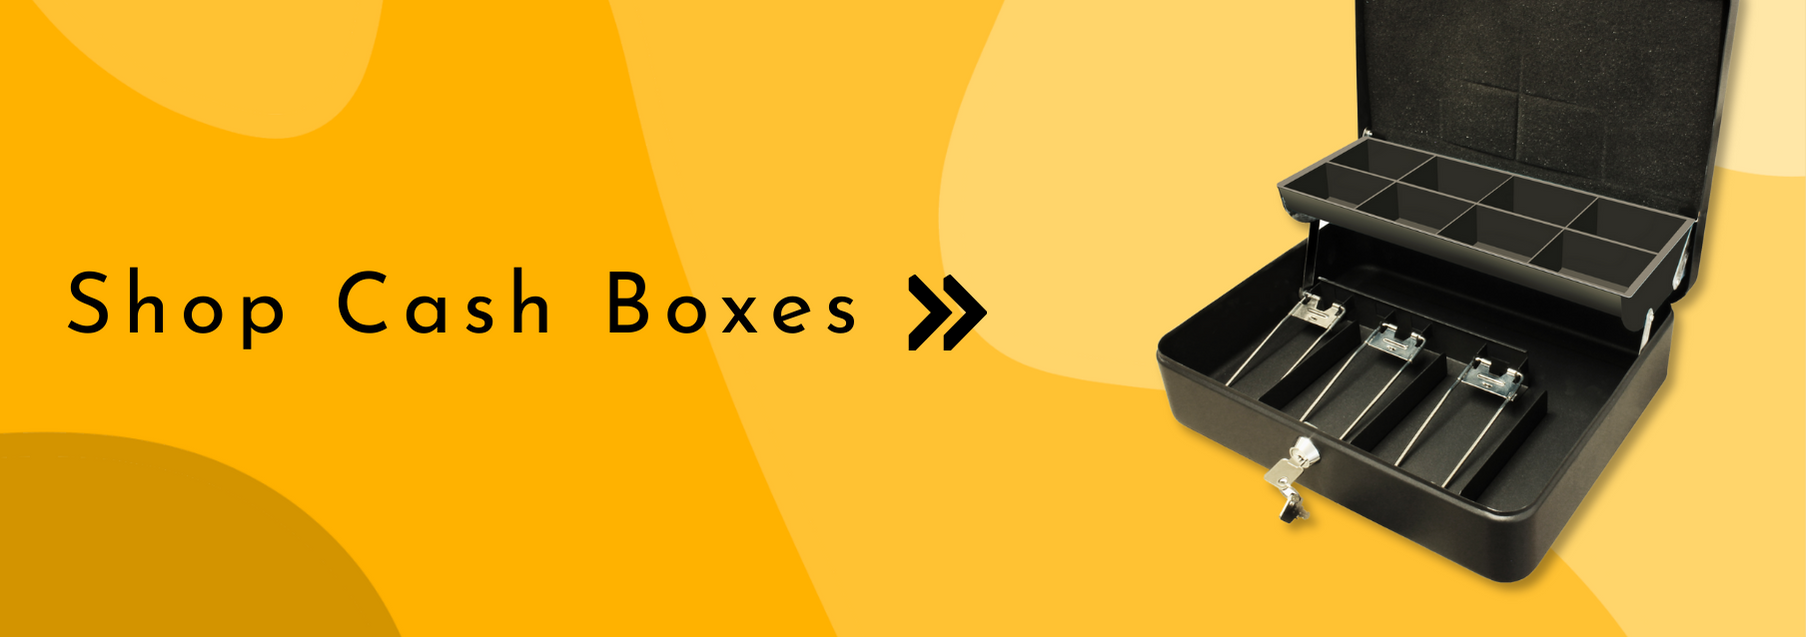 Image for the Cash Boxes category, featuring an open Ultimate Cash Box on a dual-tone yellow background, with the text 'Shop Cash Boxes >>' in bold, dark font.